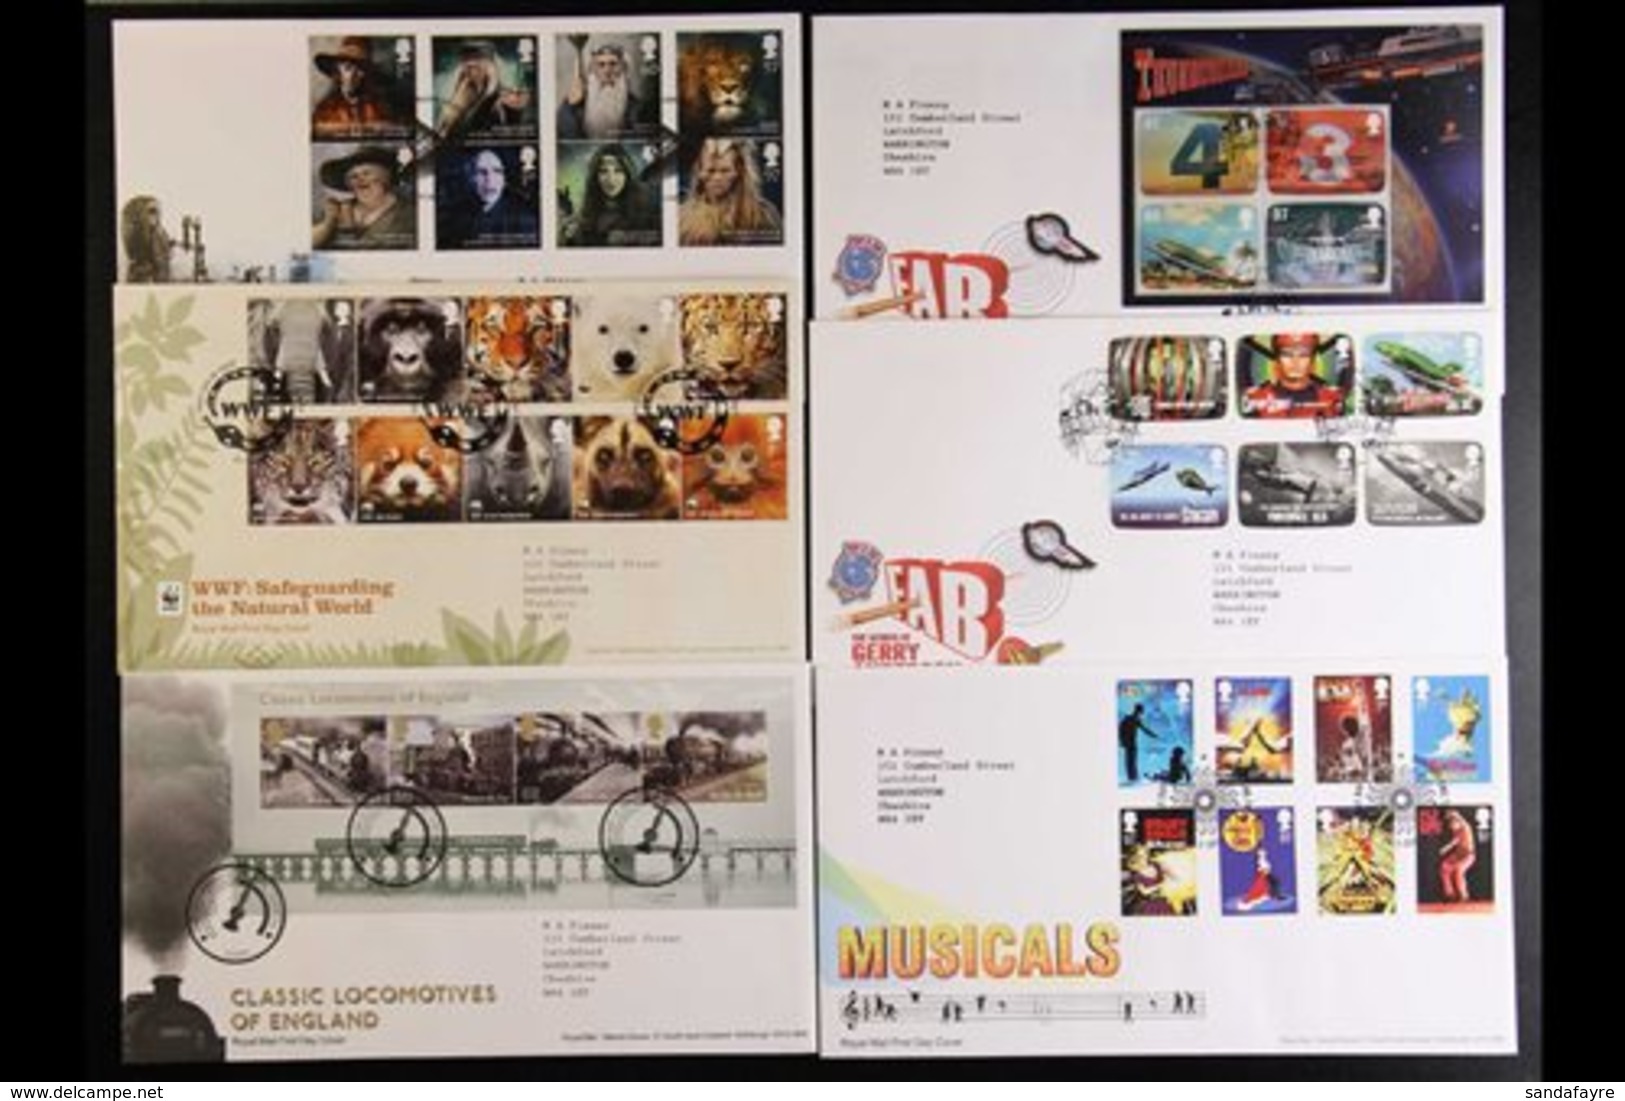 2011 COMMEMORATIVES COMPLETE  A Complete Collection Of All Of The Commemorative Sets And Miniature Sheets From Thunderbi - FDC